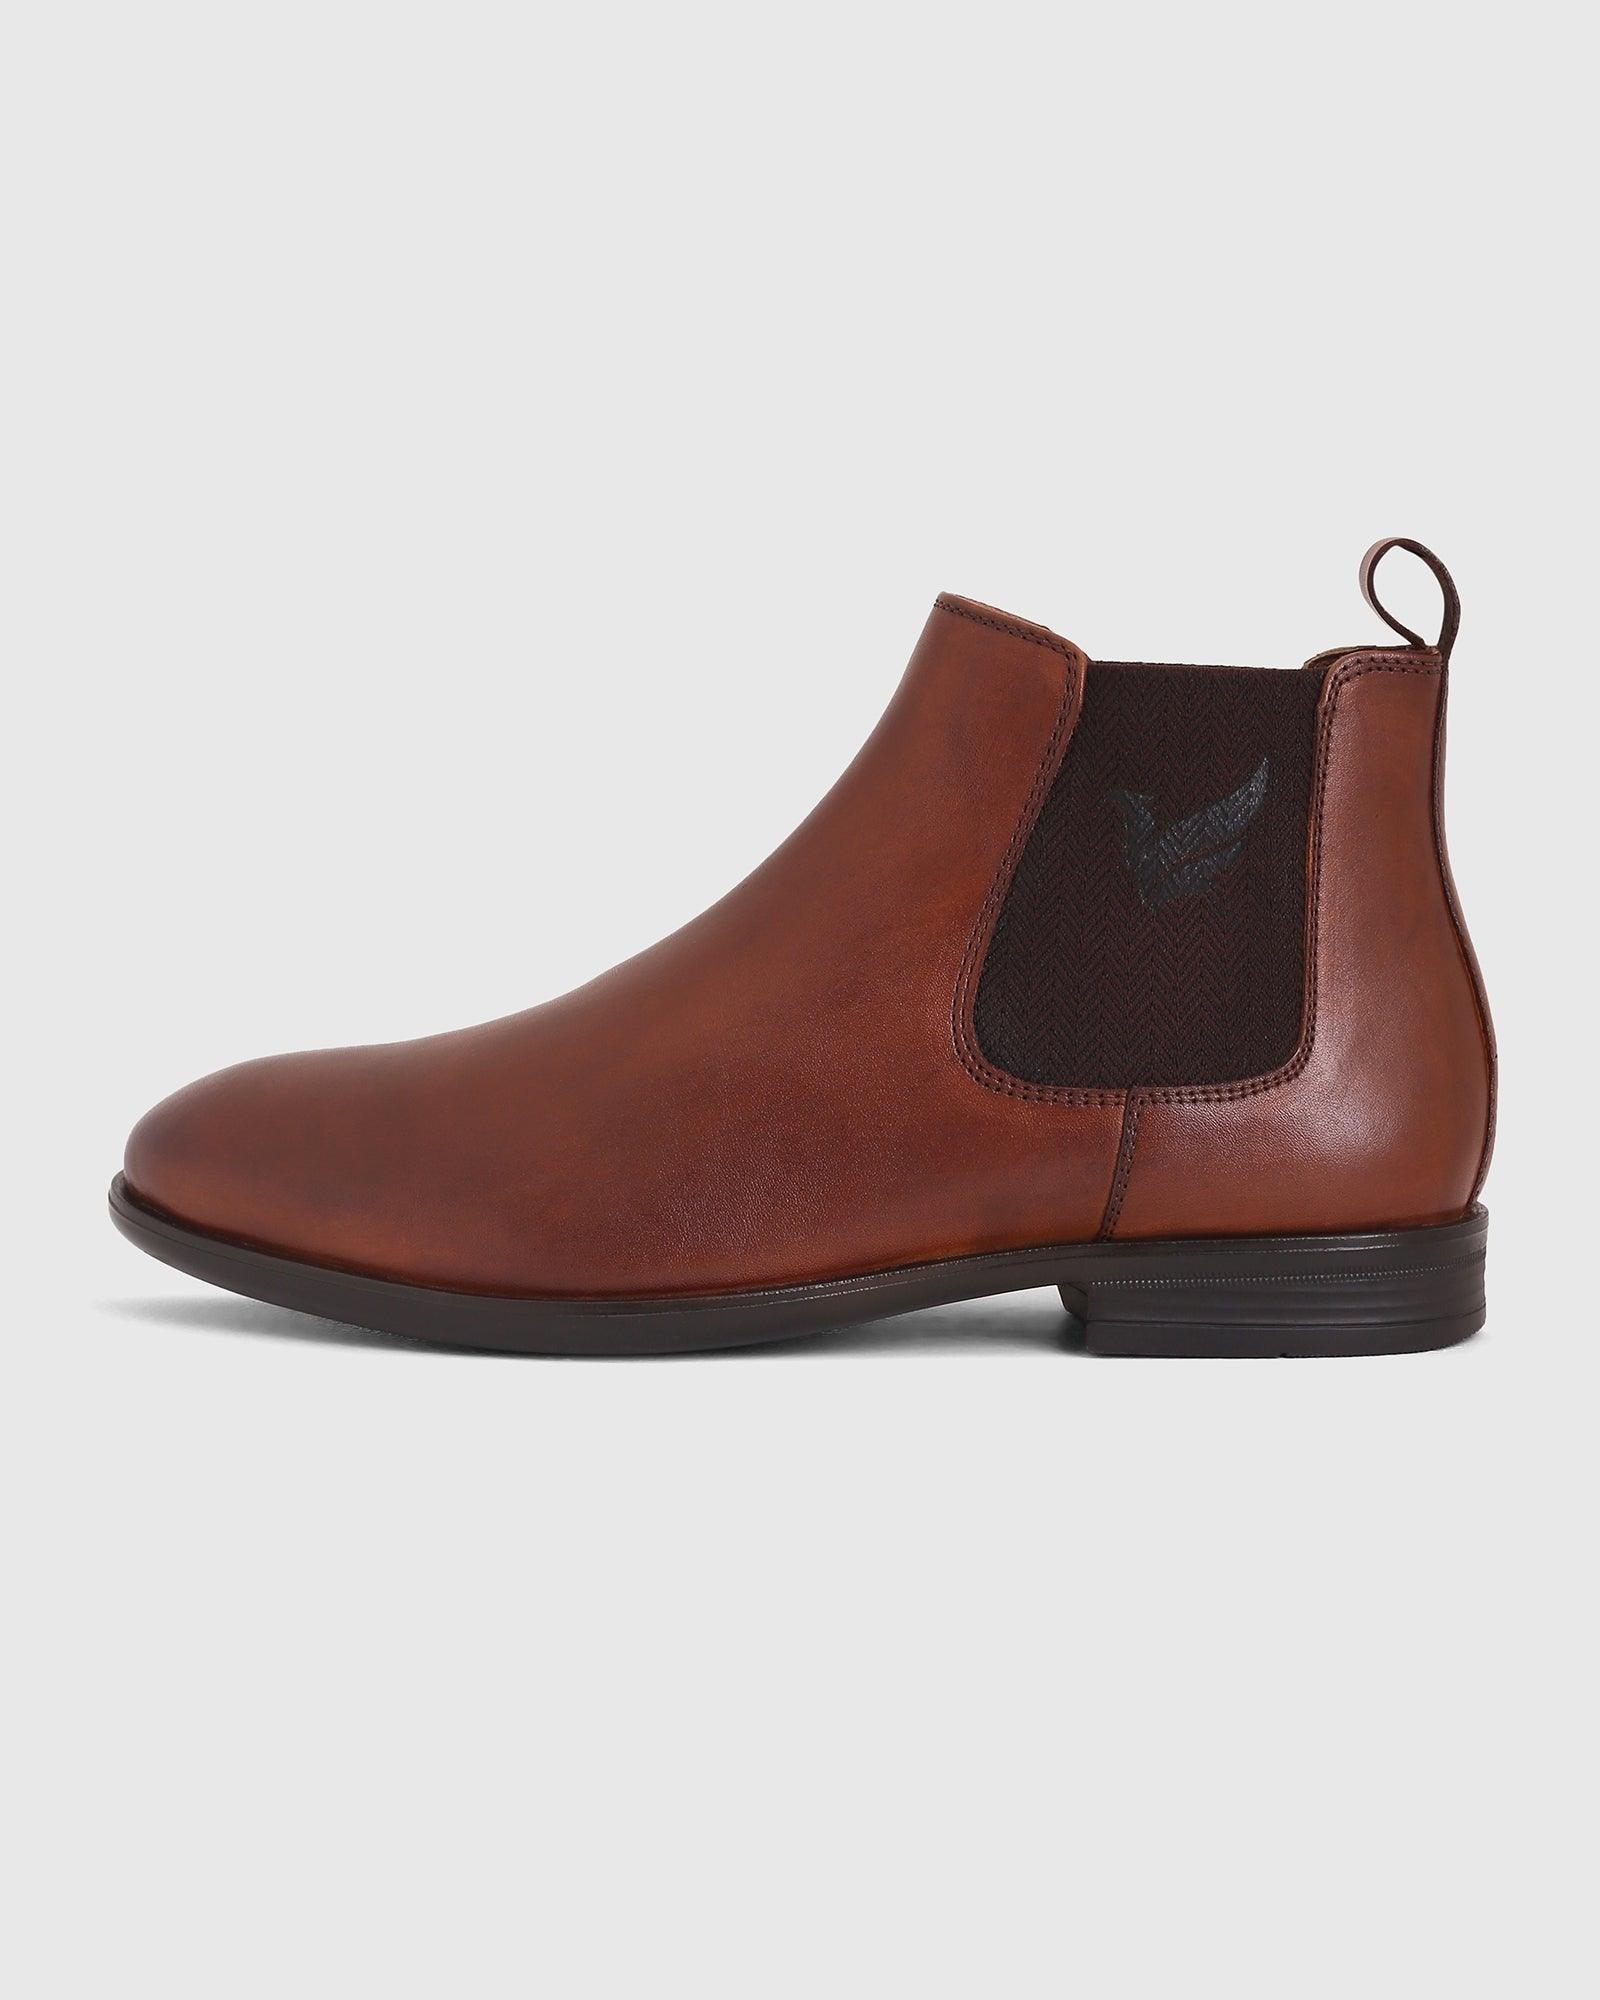 Should I buy shorter dress pants to wear with my Chelsea boots? - Quora